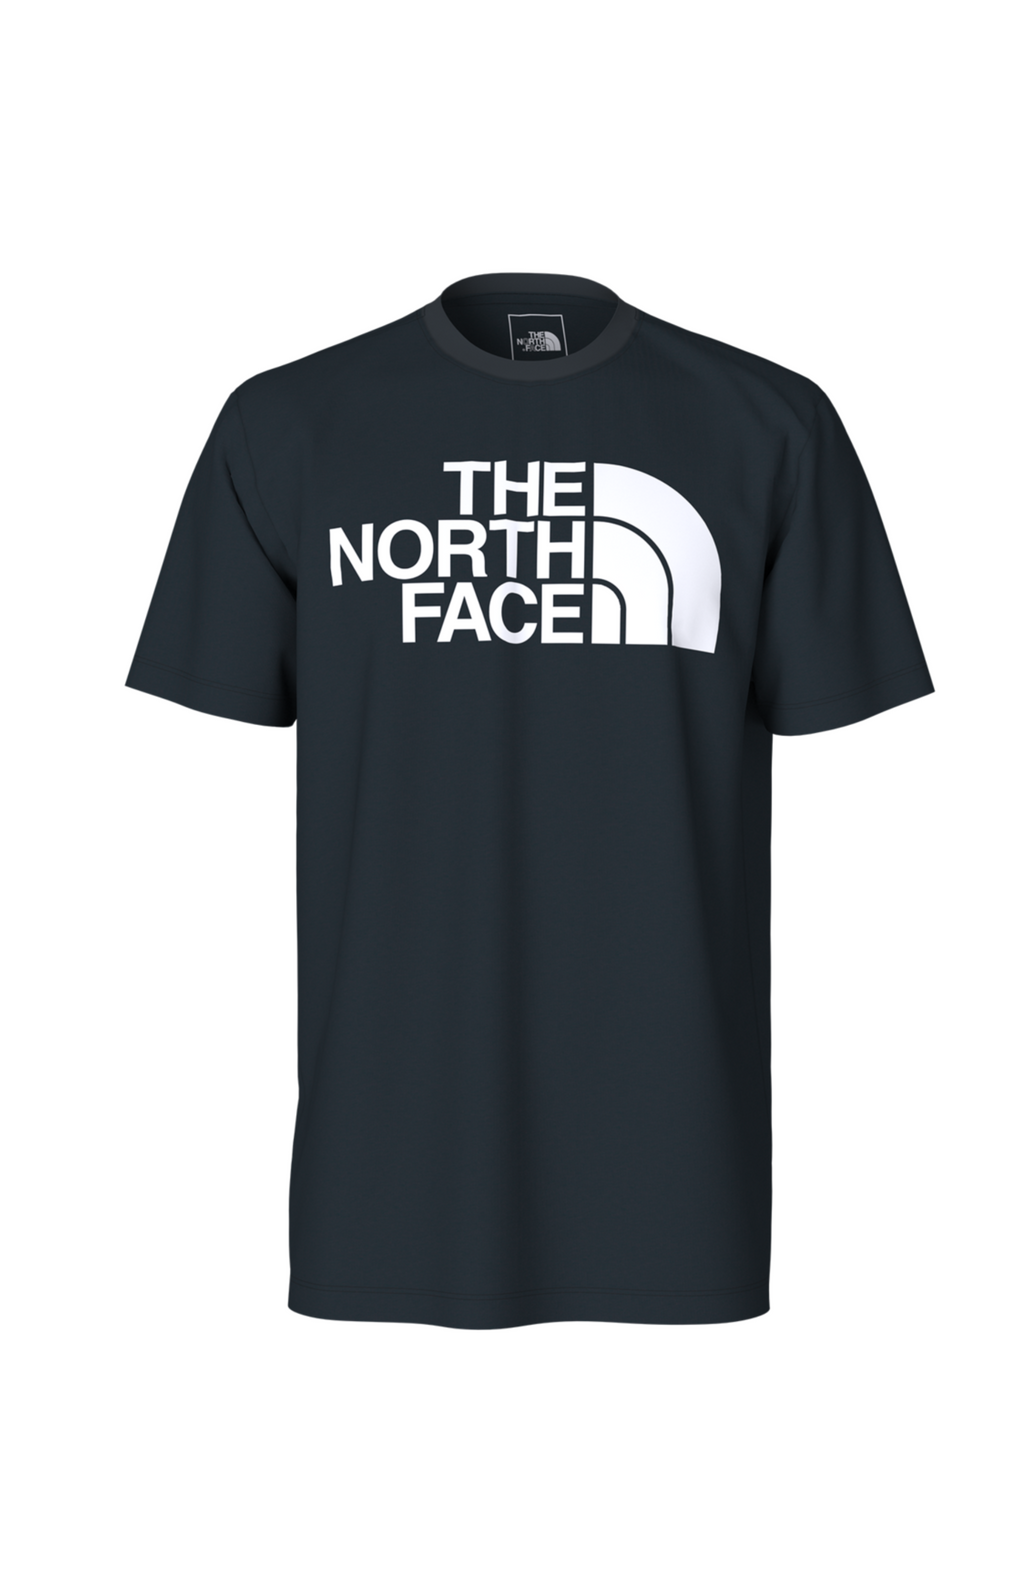 The North Face - Men's Short Sleeve Half Dome Tee